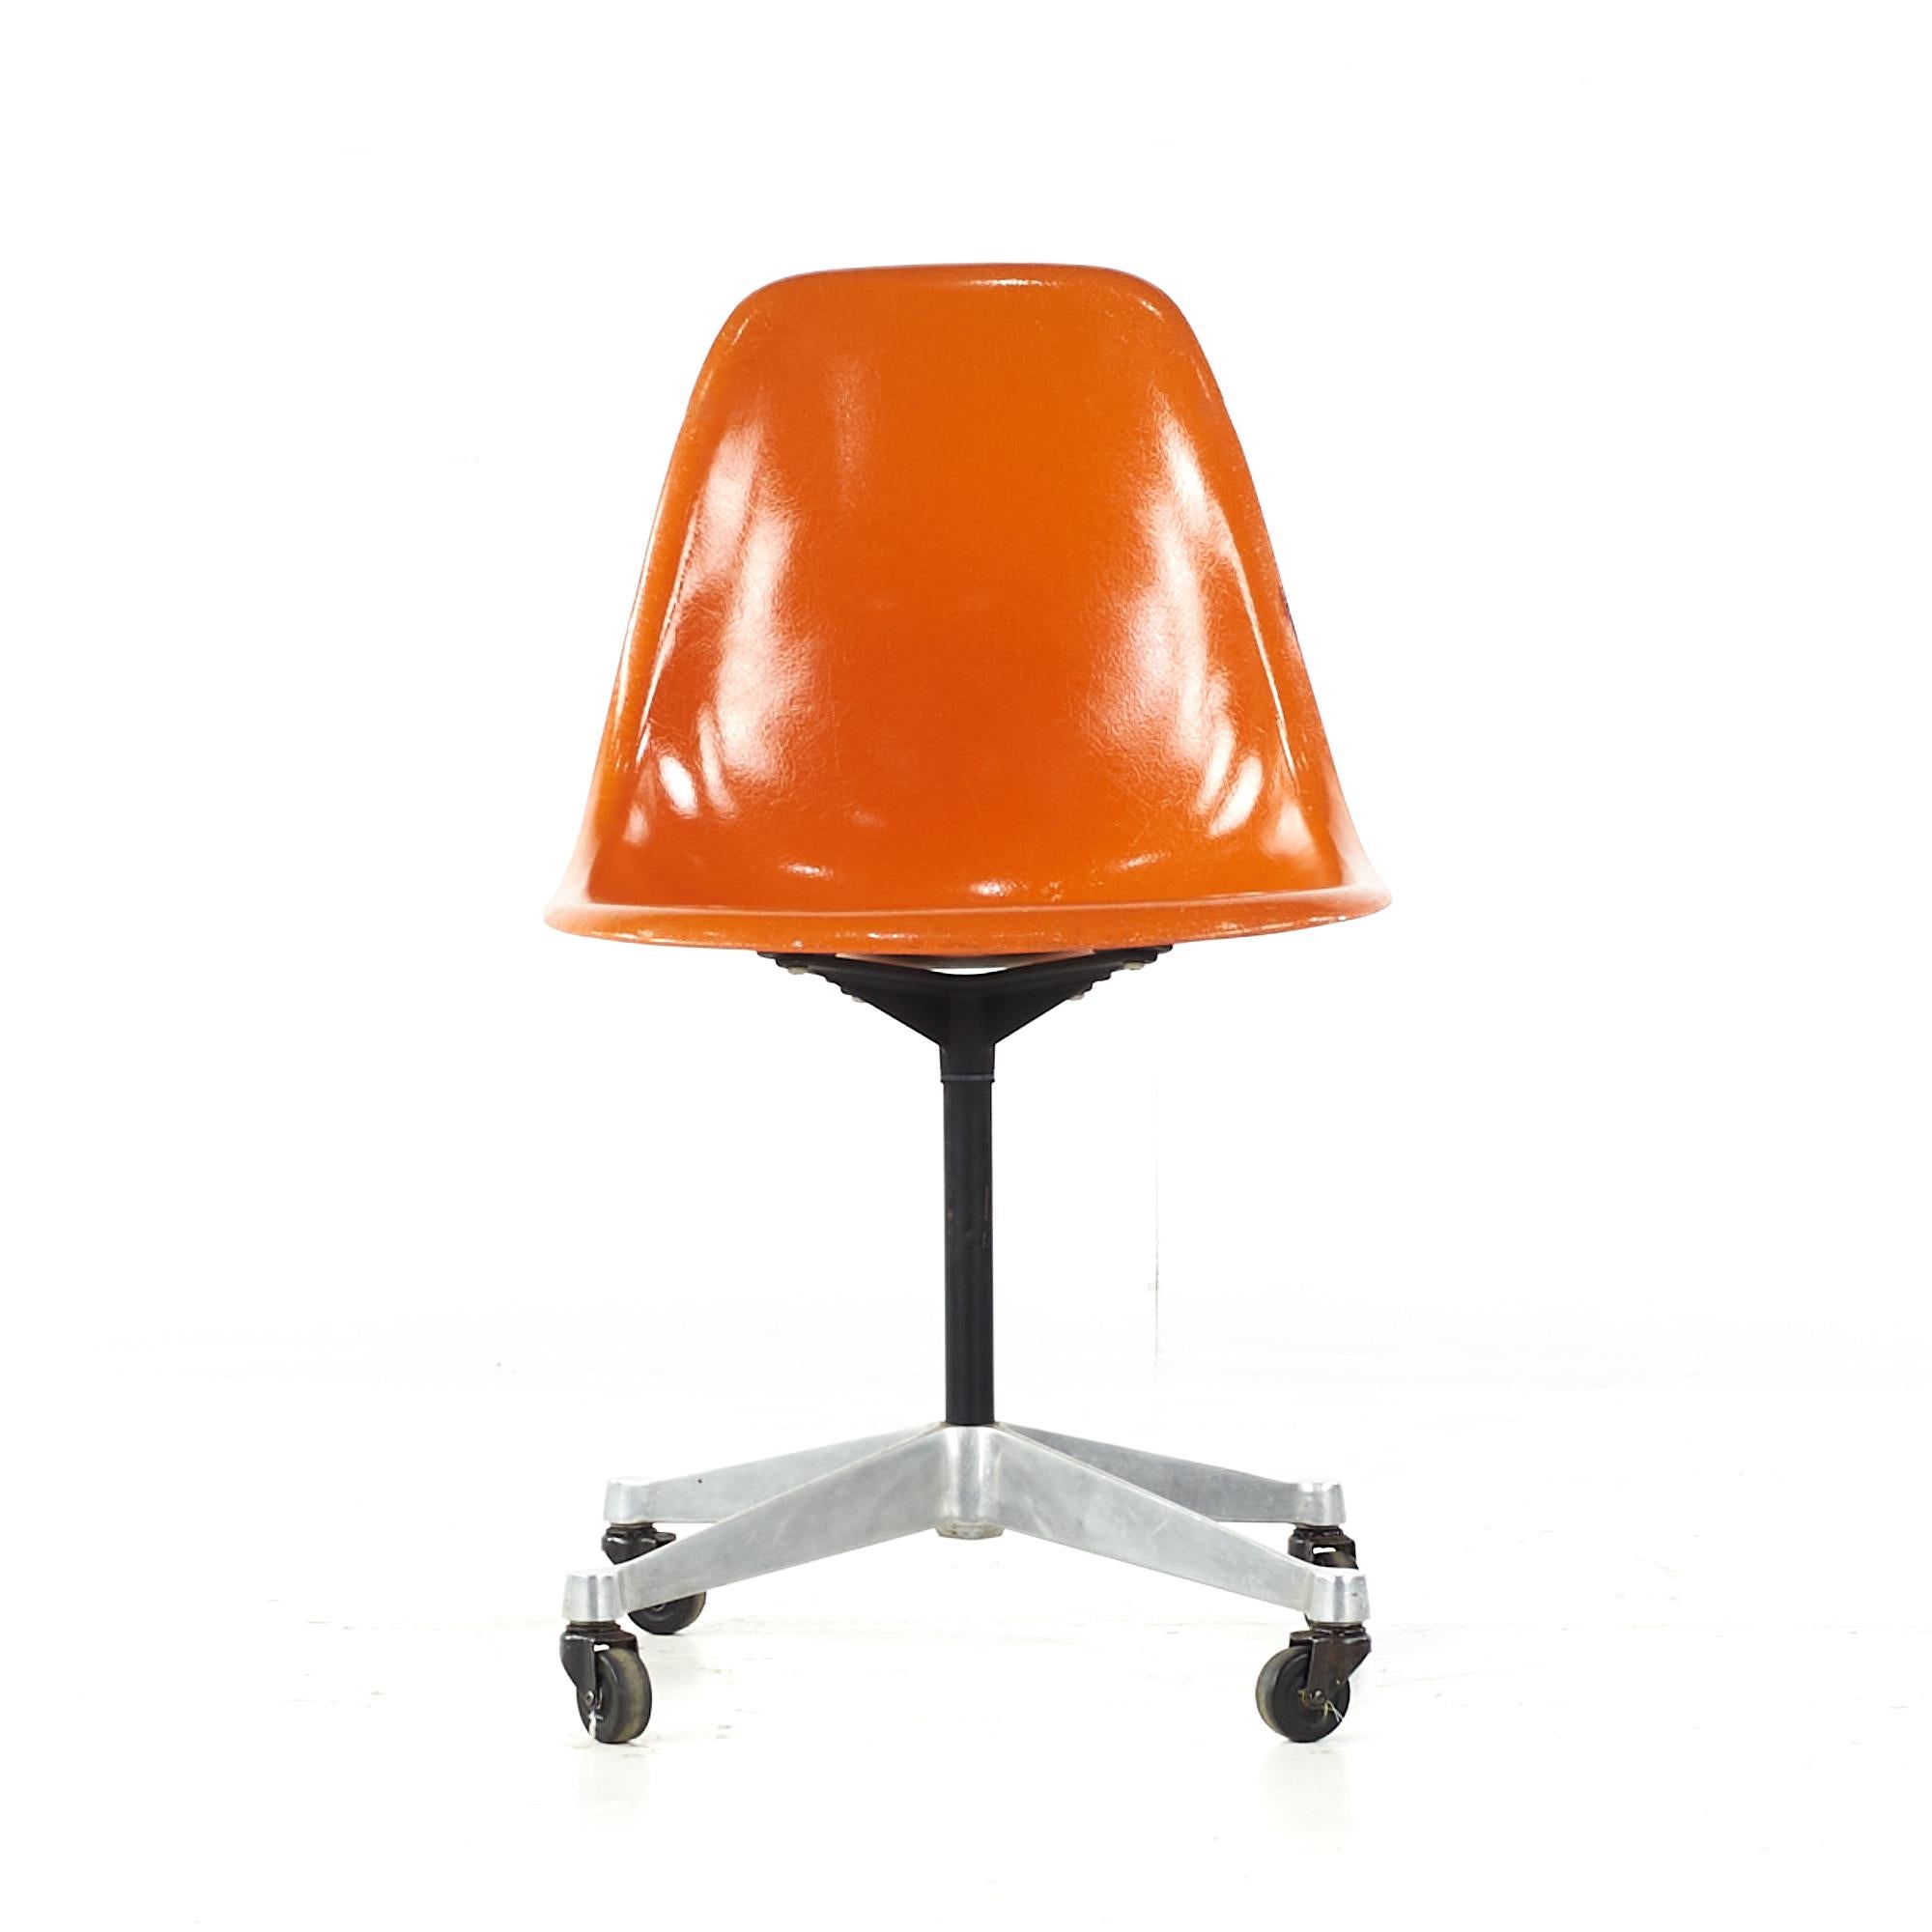 Charles and Ray Eames for Herman Miller Mid Century Wheeled Shell Chair

This chair measures: 18.5 wide x 24 deep x 32 high, with a seat height of 17.5 inches

All pieces of furniture can be had in what we call restored vintage condition. That means